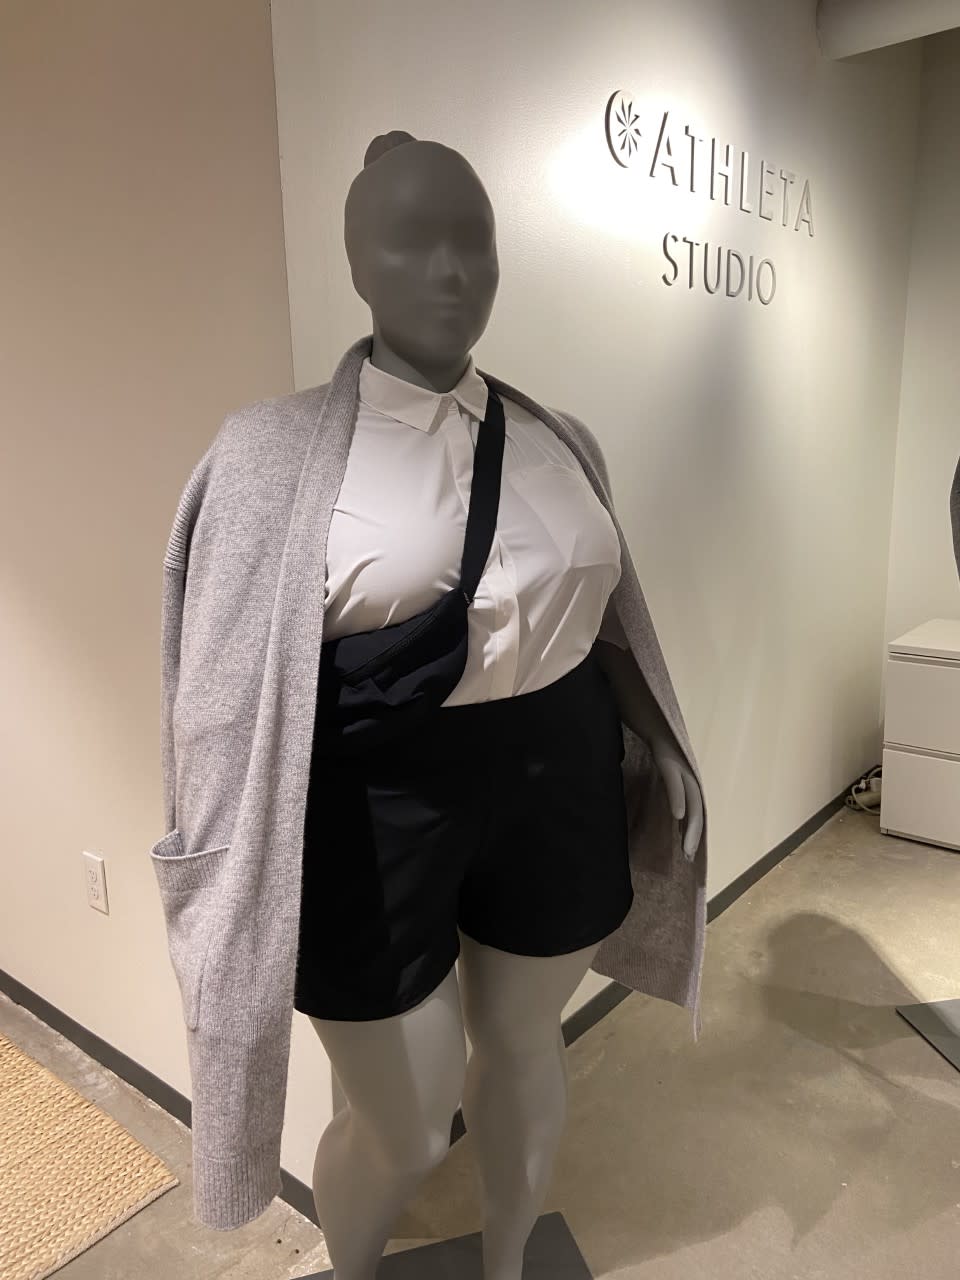 Athleta uses plus-size mannequins in its stores. - Credit: Kellie Ell / WWD